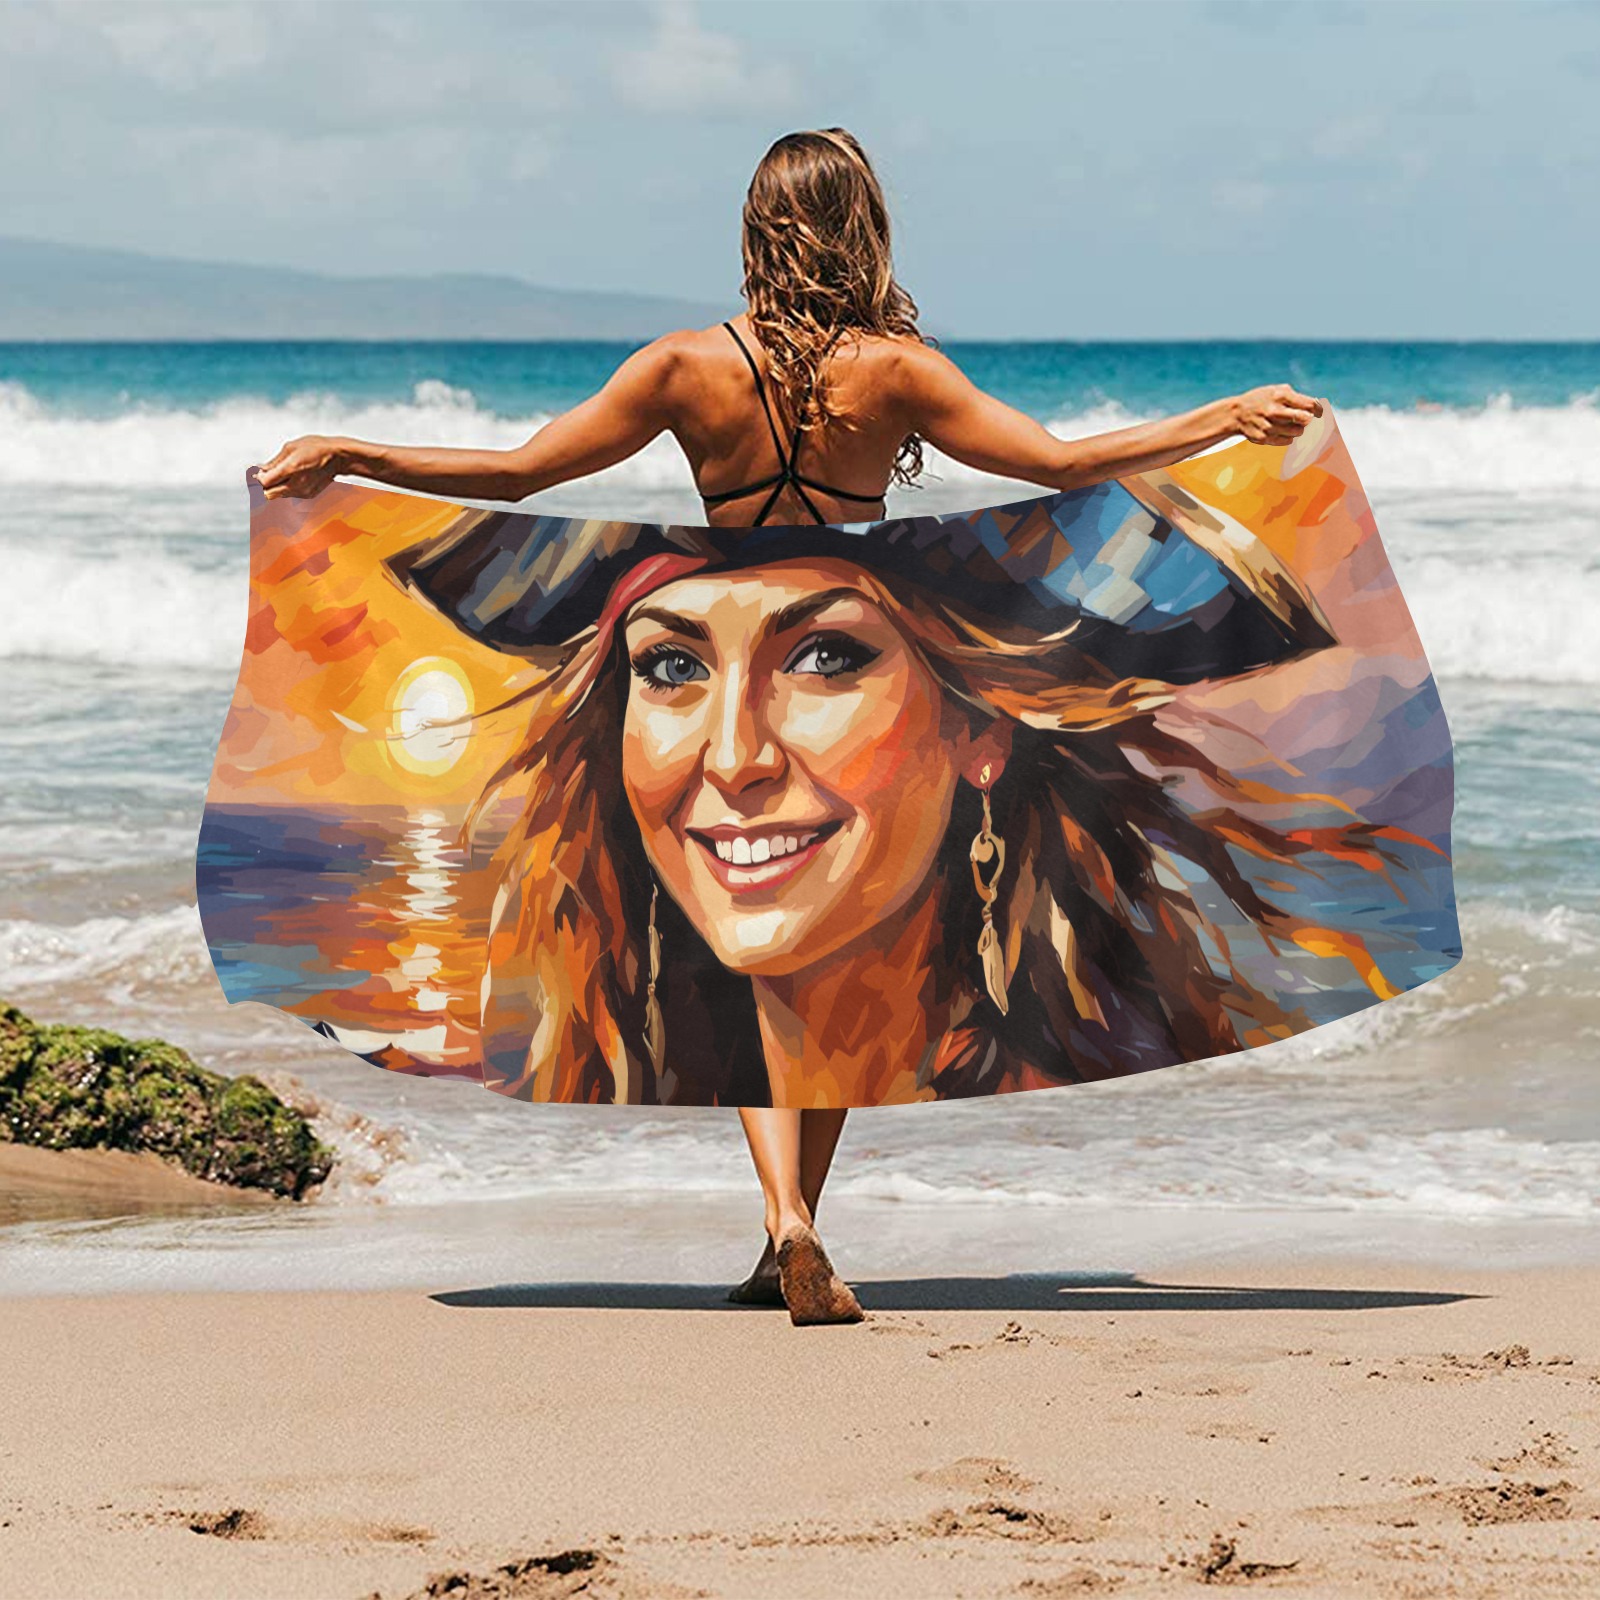 Lovely smiling pirate woman by the sea at sunset. Beach Towel 32"x 71"